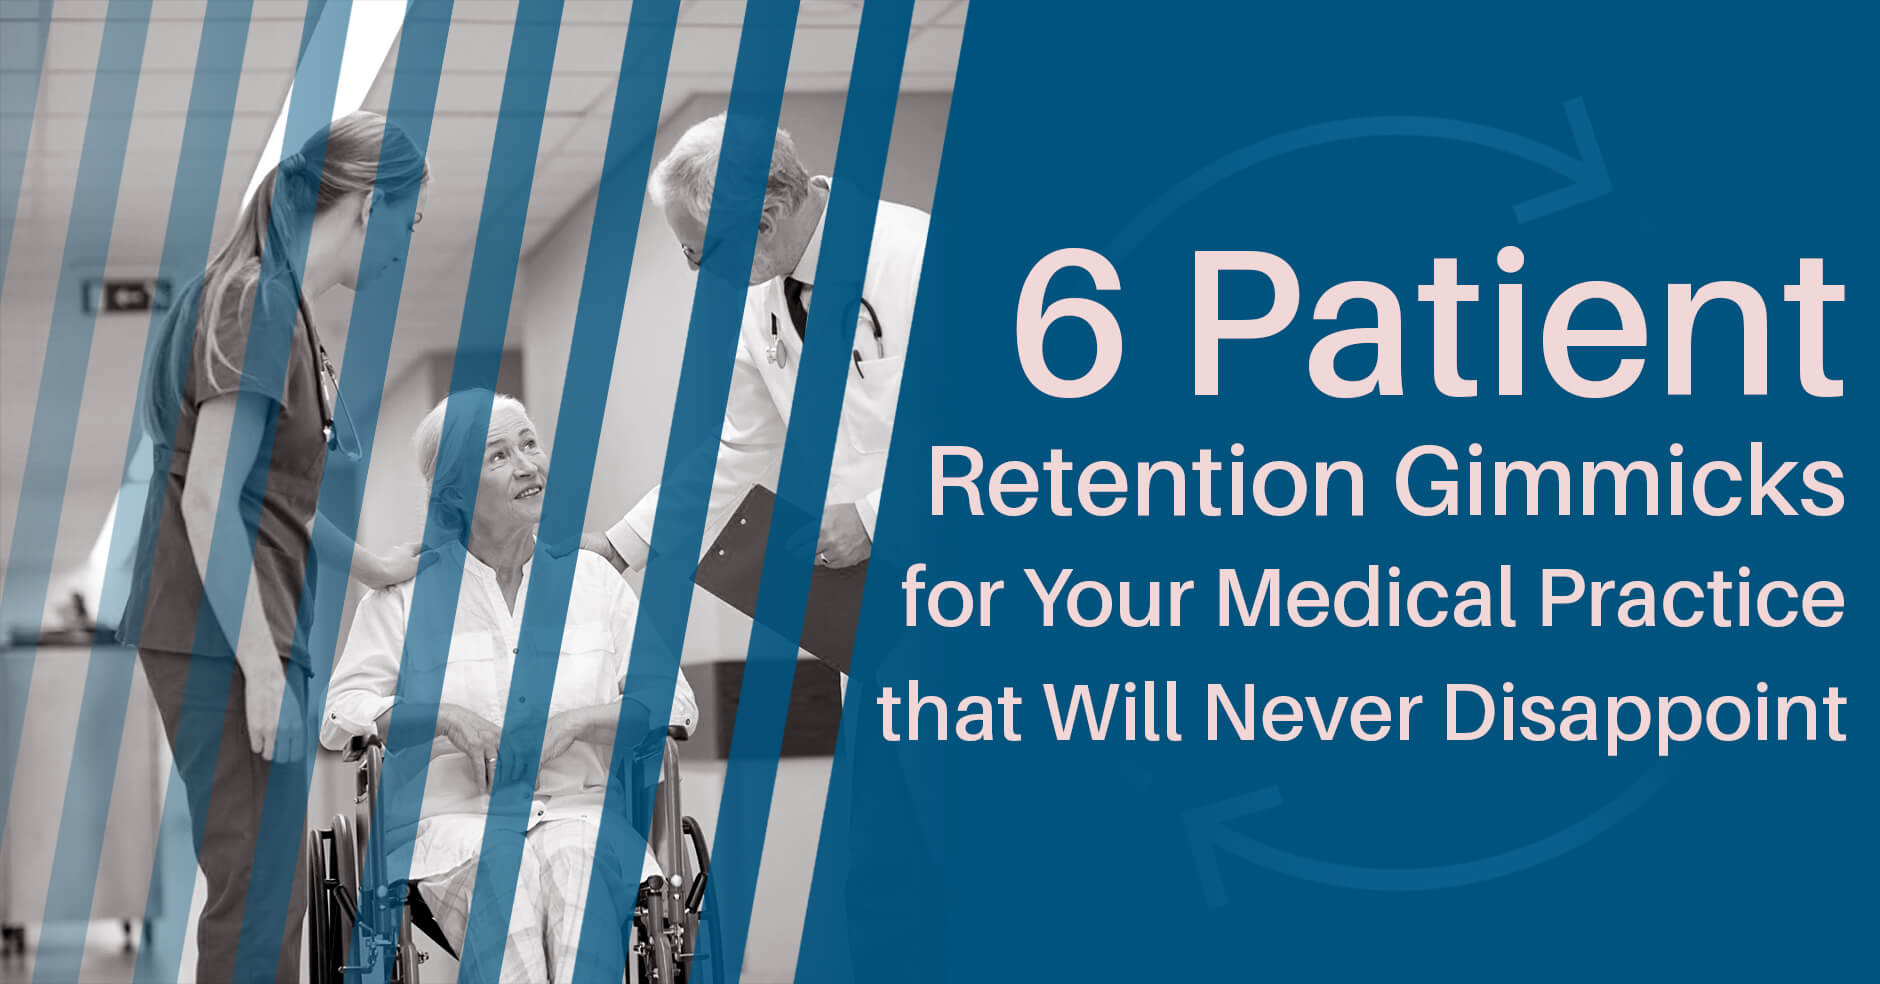 6 Patient Retention Gimmicks for Your Medical Practice that Will Never Disappoint